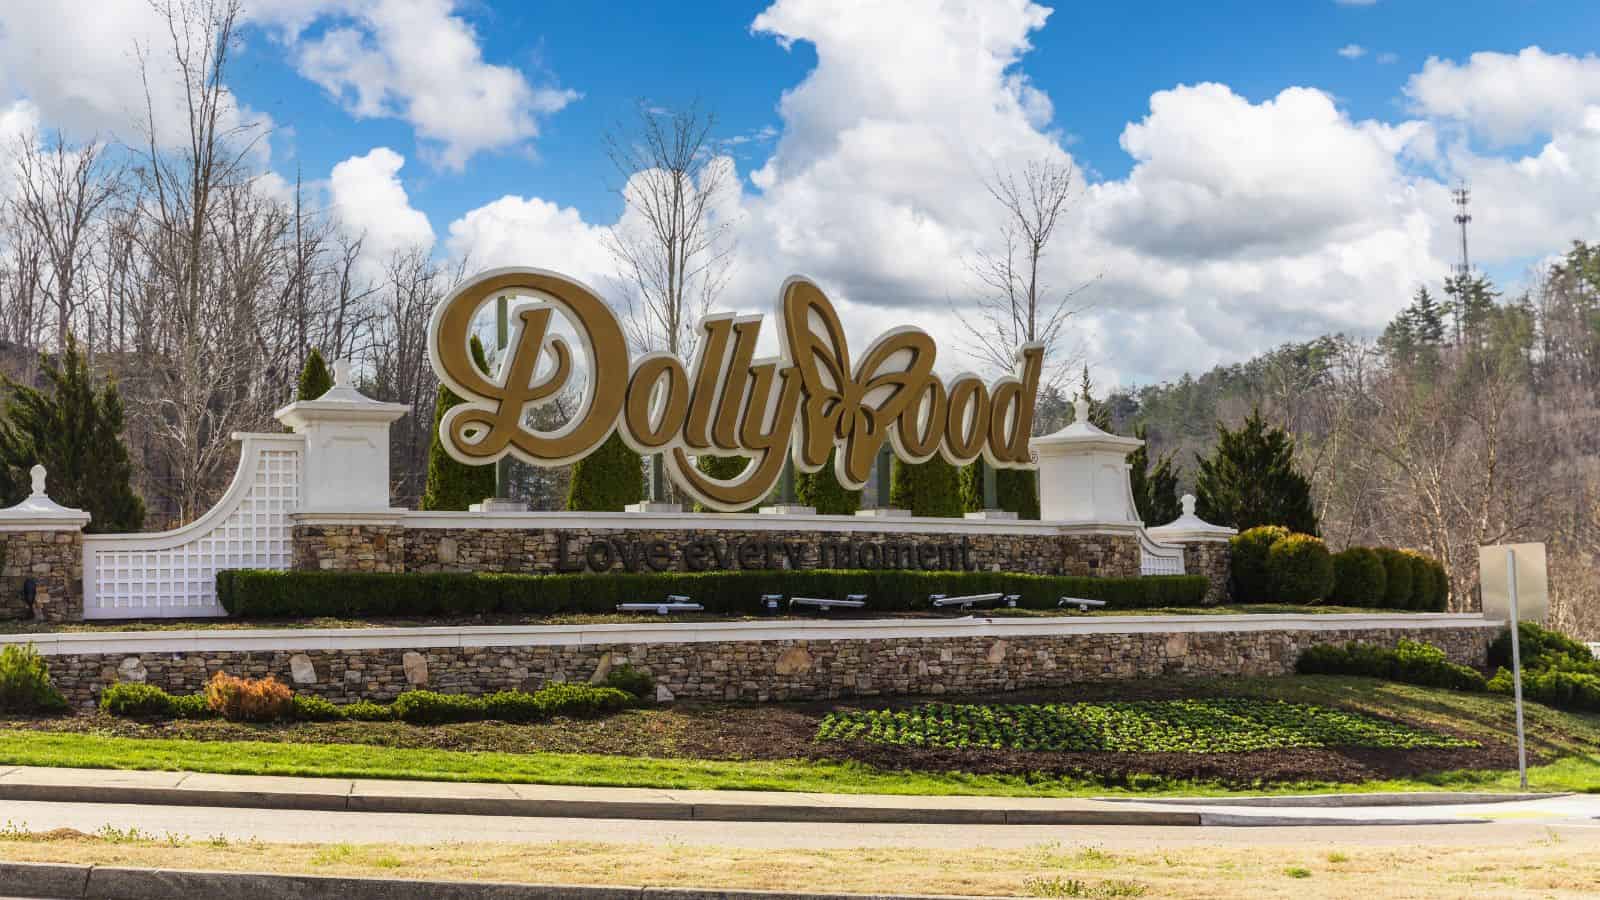 <p>Dolly Parton may be a gem, but her water park? Let’s just say it’s not making waves. Other parks seem to offer much more splash for your cash.</p>